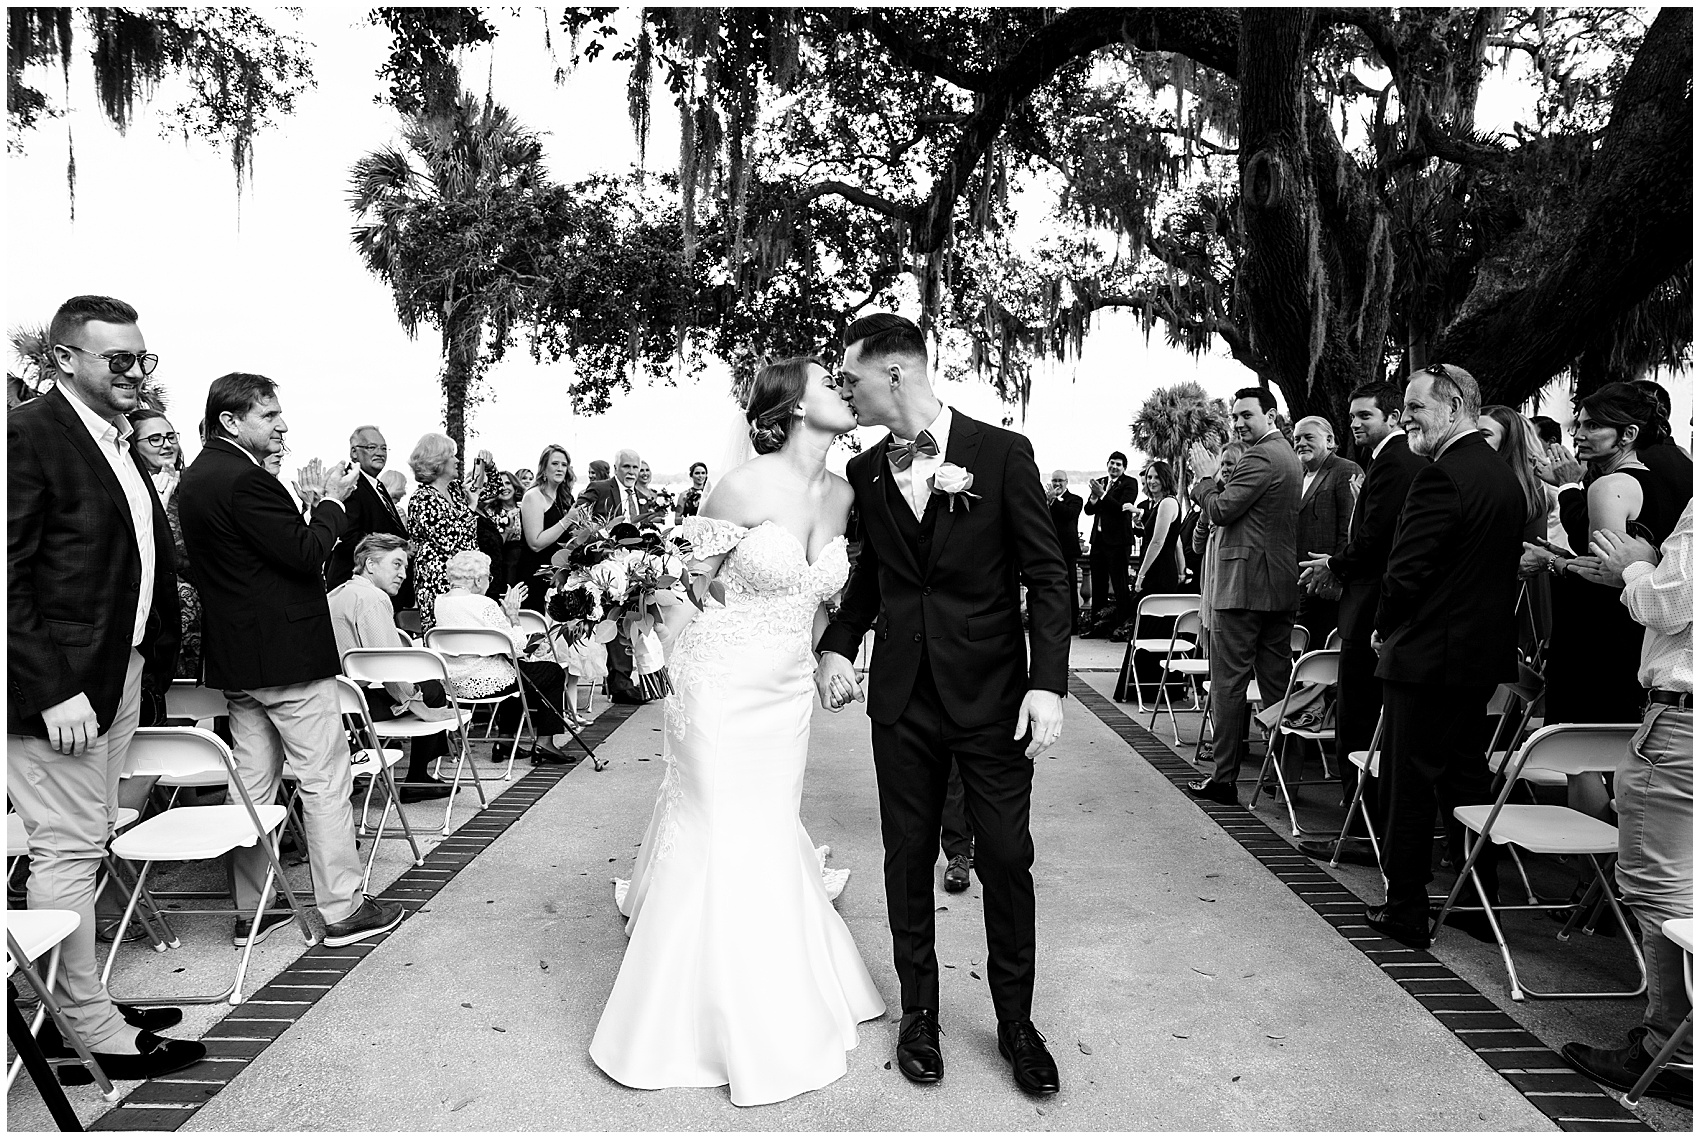 Newlyweds kiss in the aisle under a large oak tree to end their club continental wedding ceremony